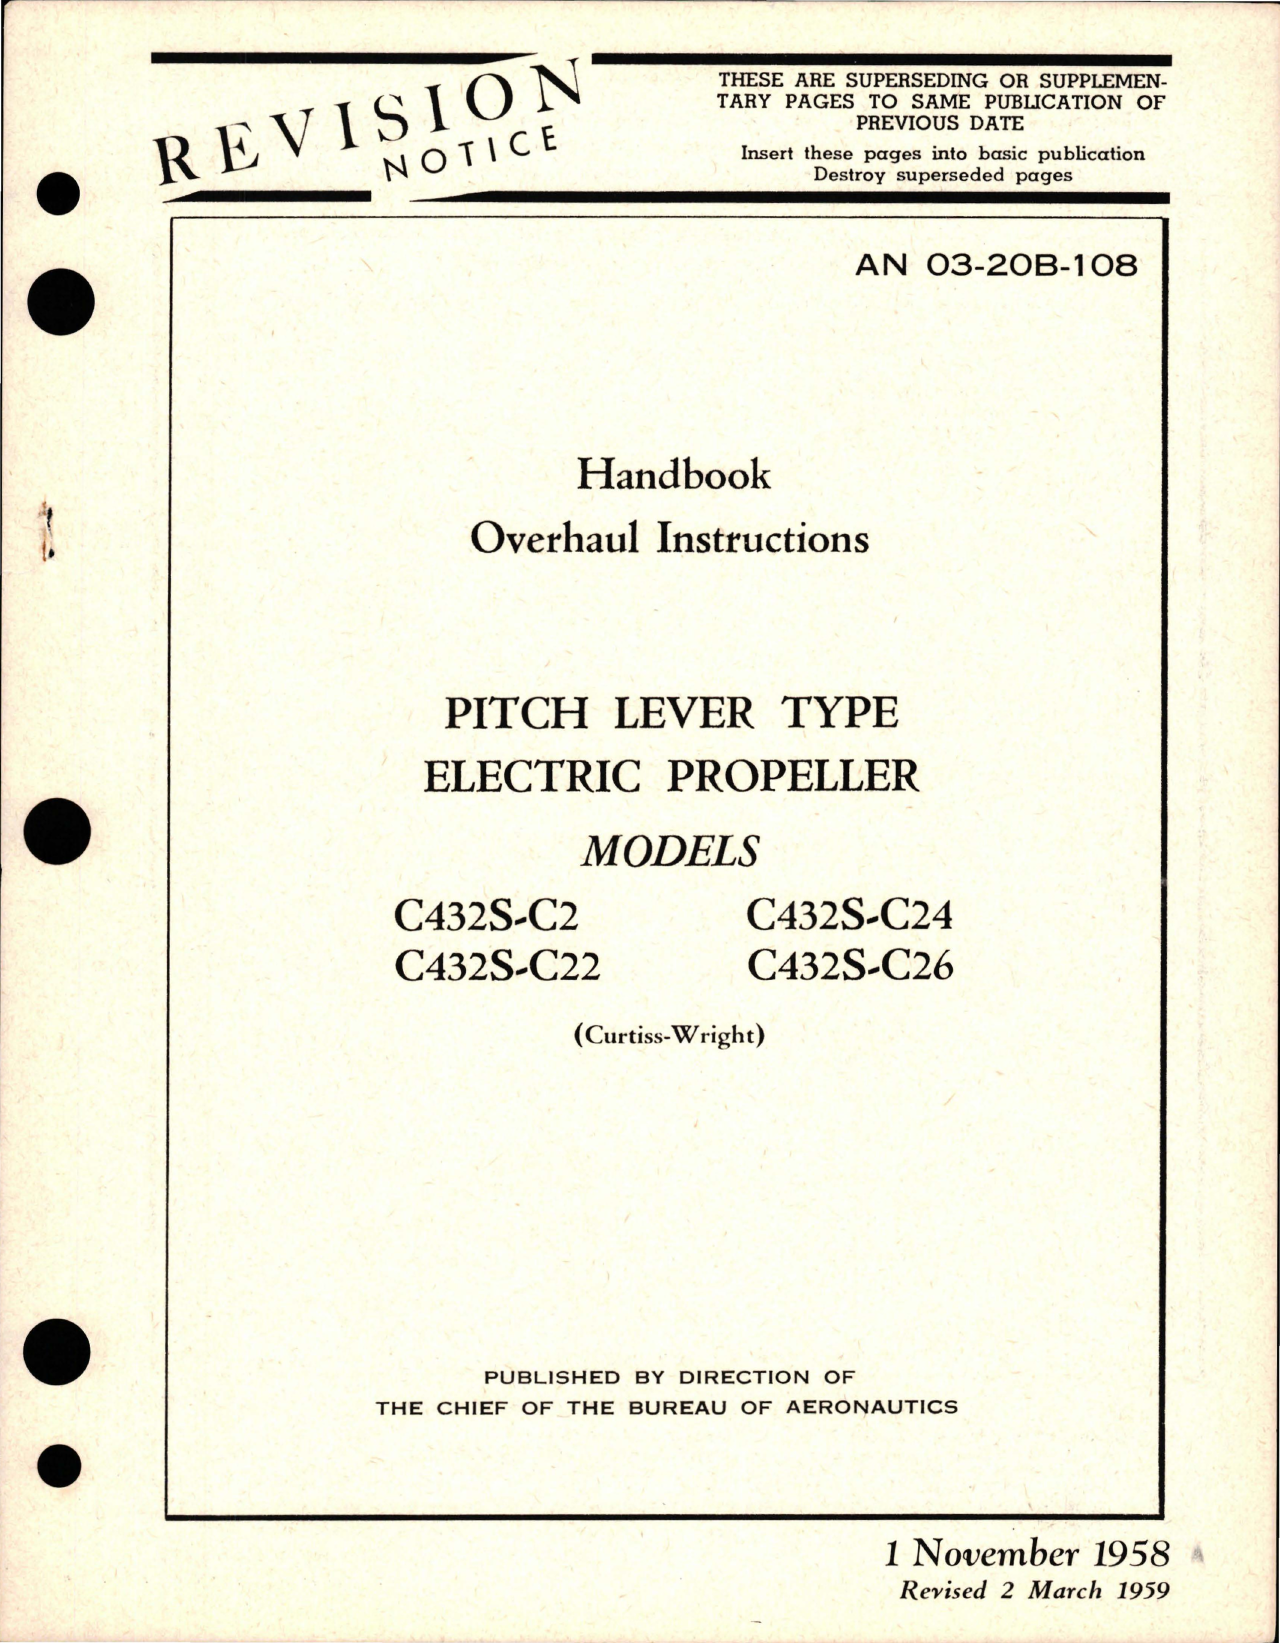 Sample page 1 from AirCorps Library document: Overhaul Instructions for Pitch Lever Type Electric Propeller - Models C432S-C22, C432S-C24, C432S-C26, and C432S-C2